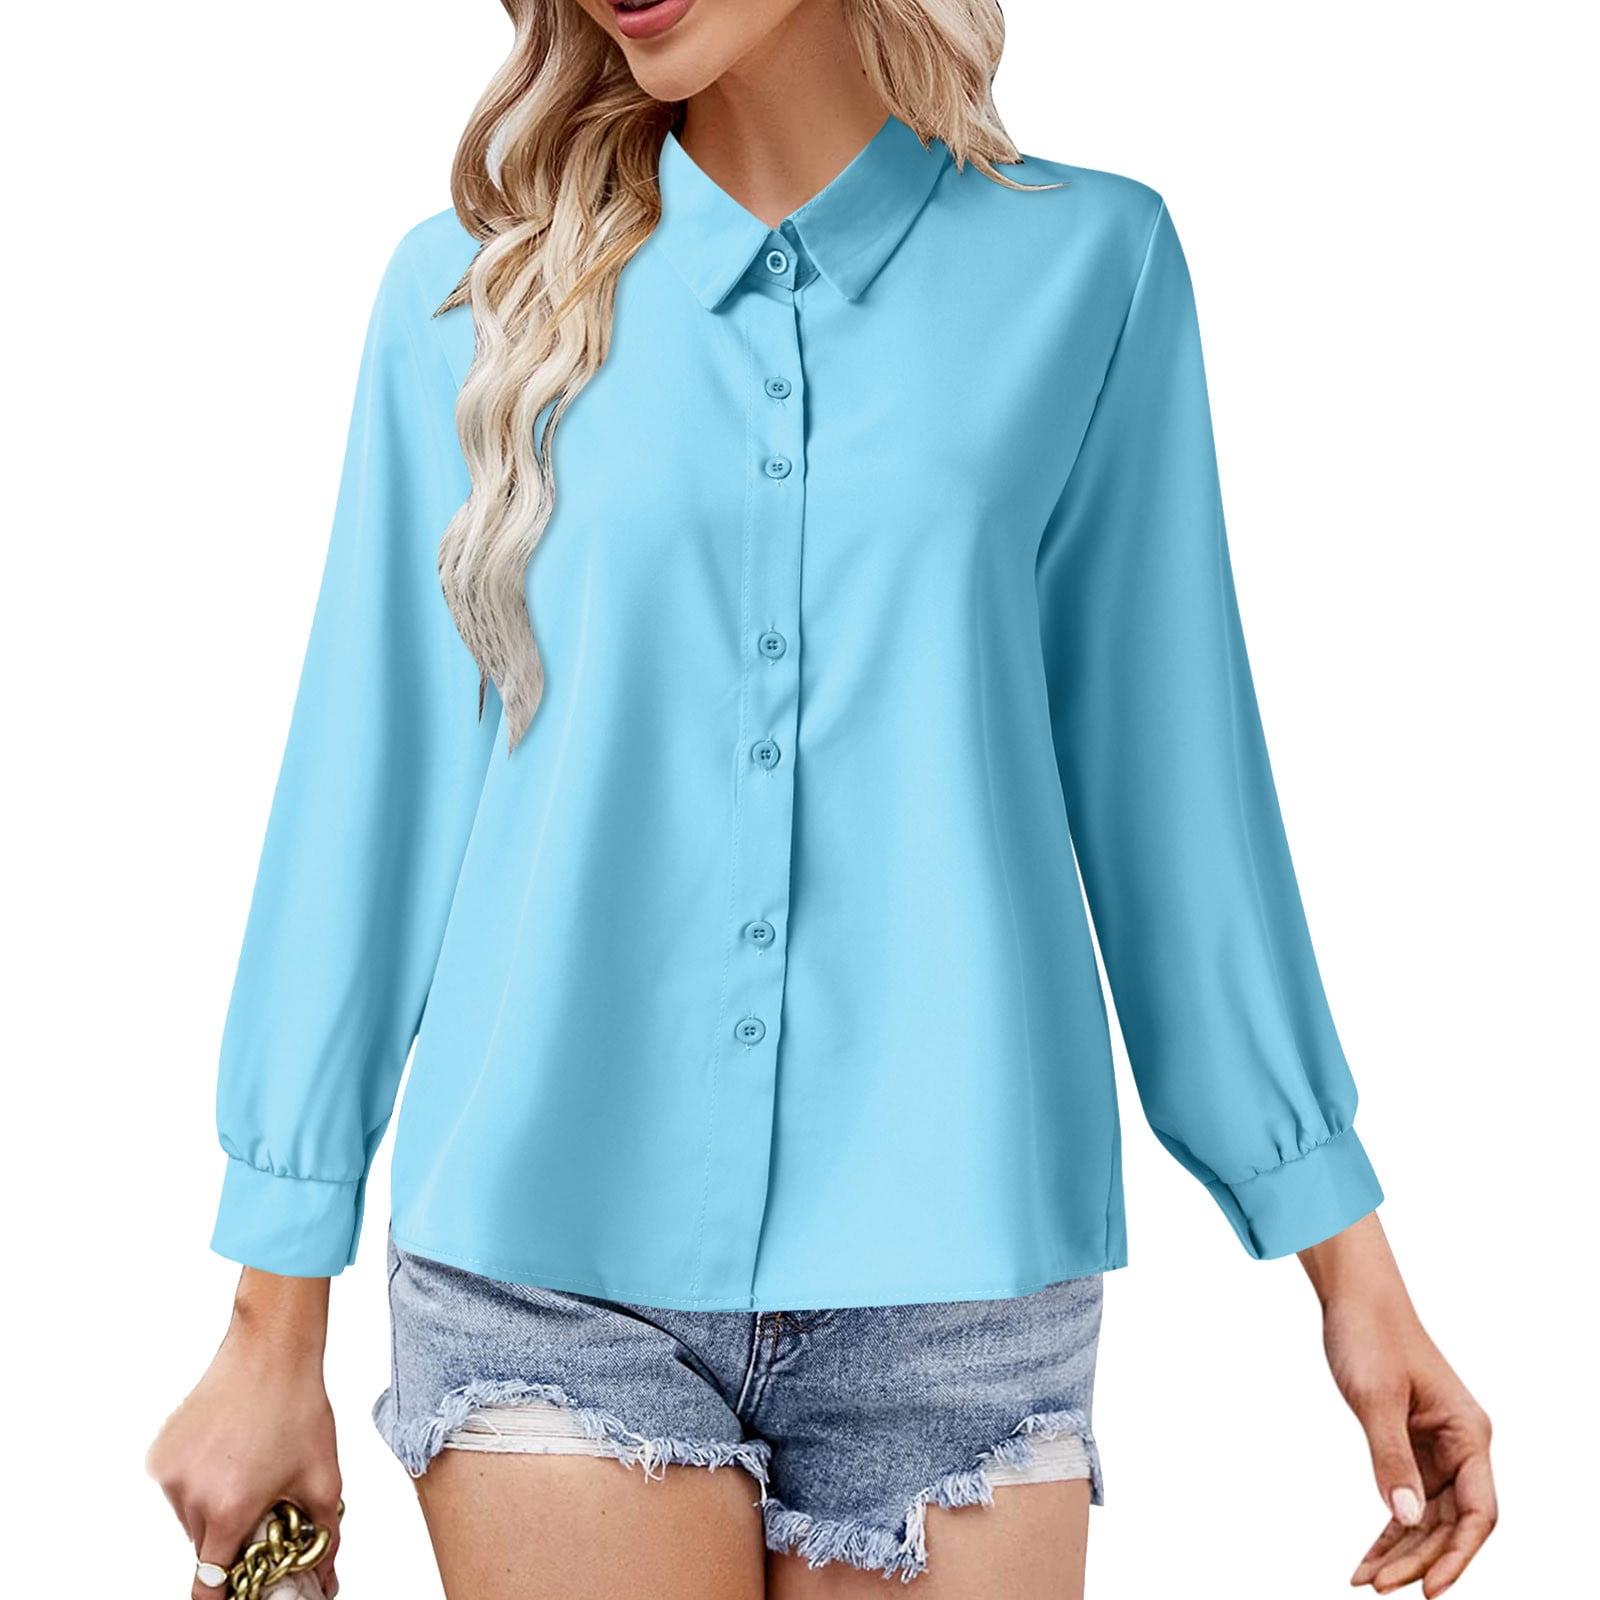 Loose Solid Color Tops Elegant Round Neck Tees Women's Button Down